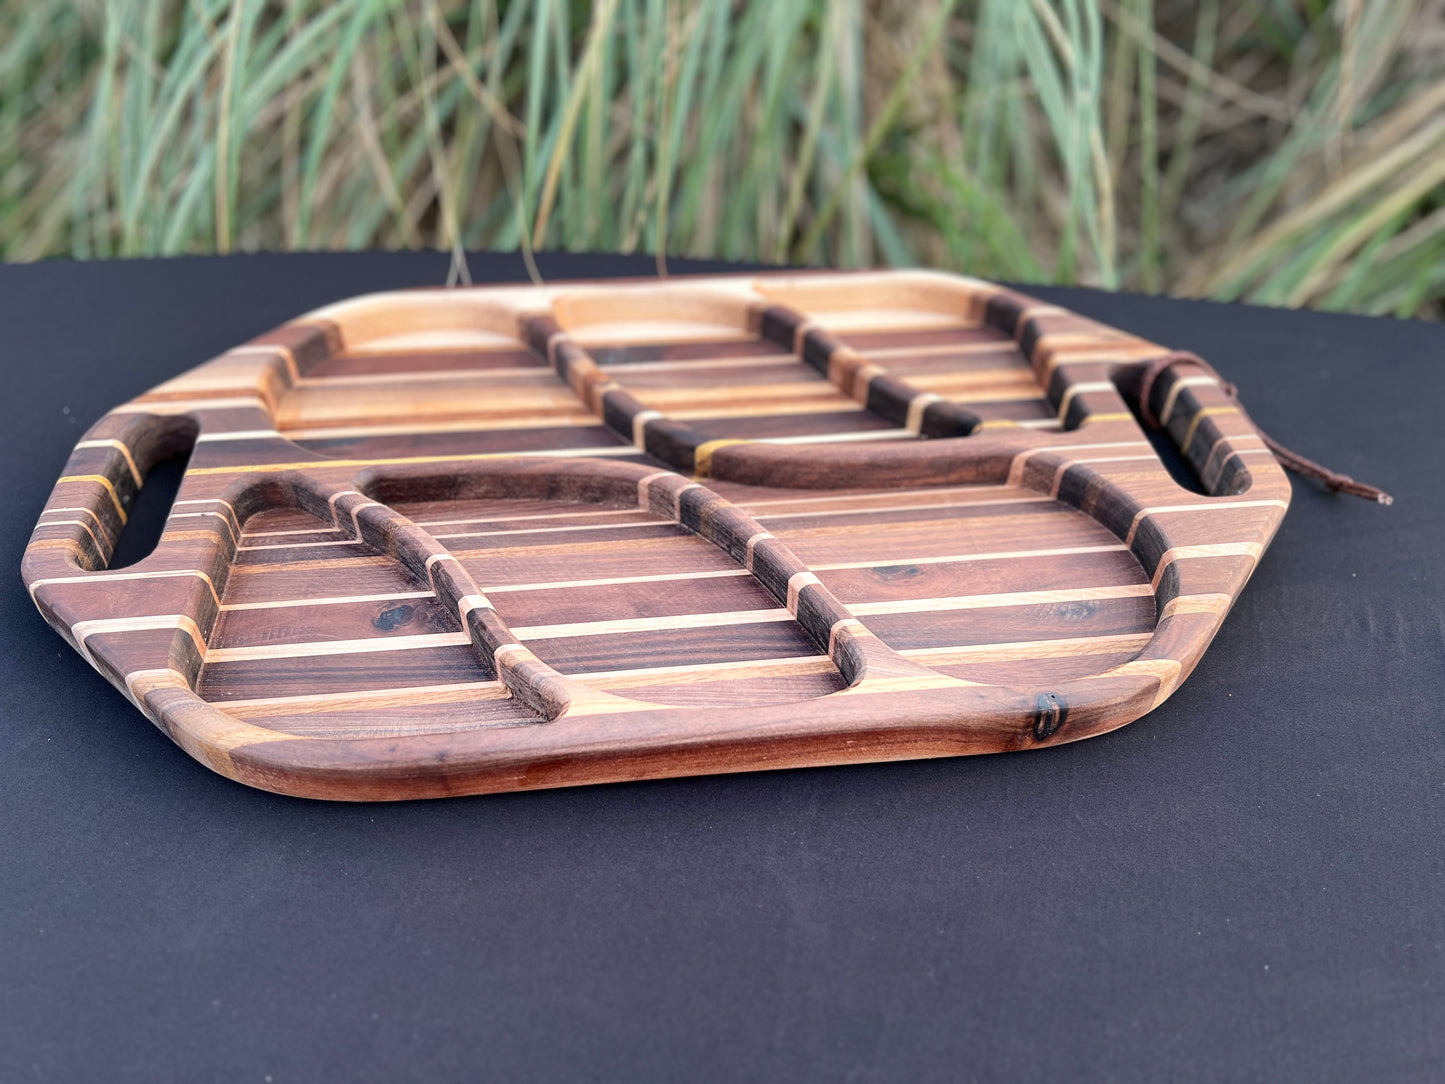 Exquisite serving tray with inserts